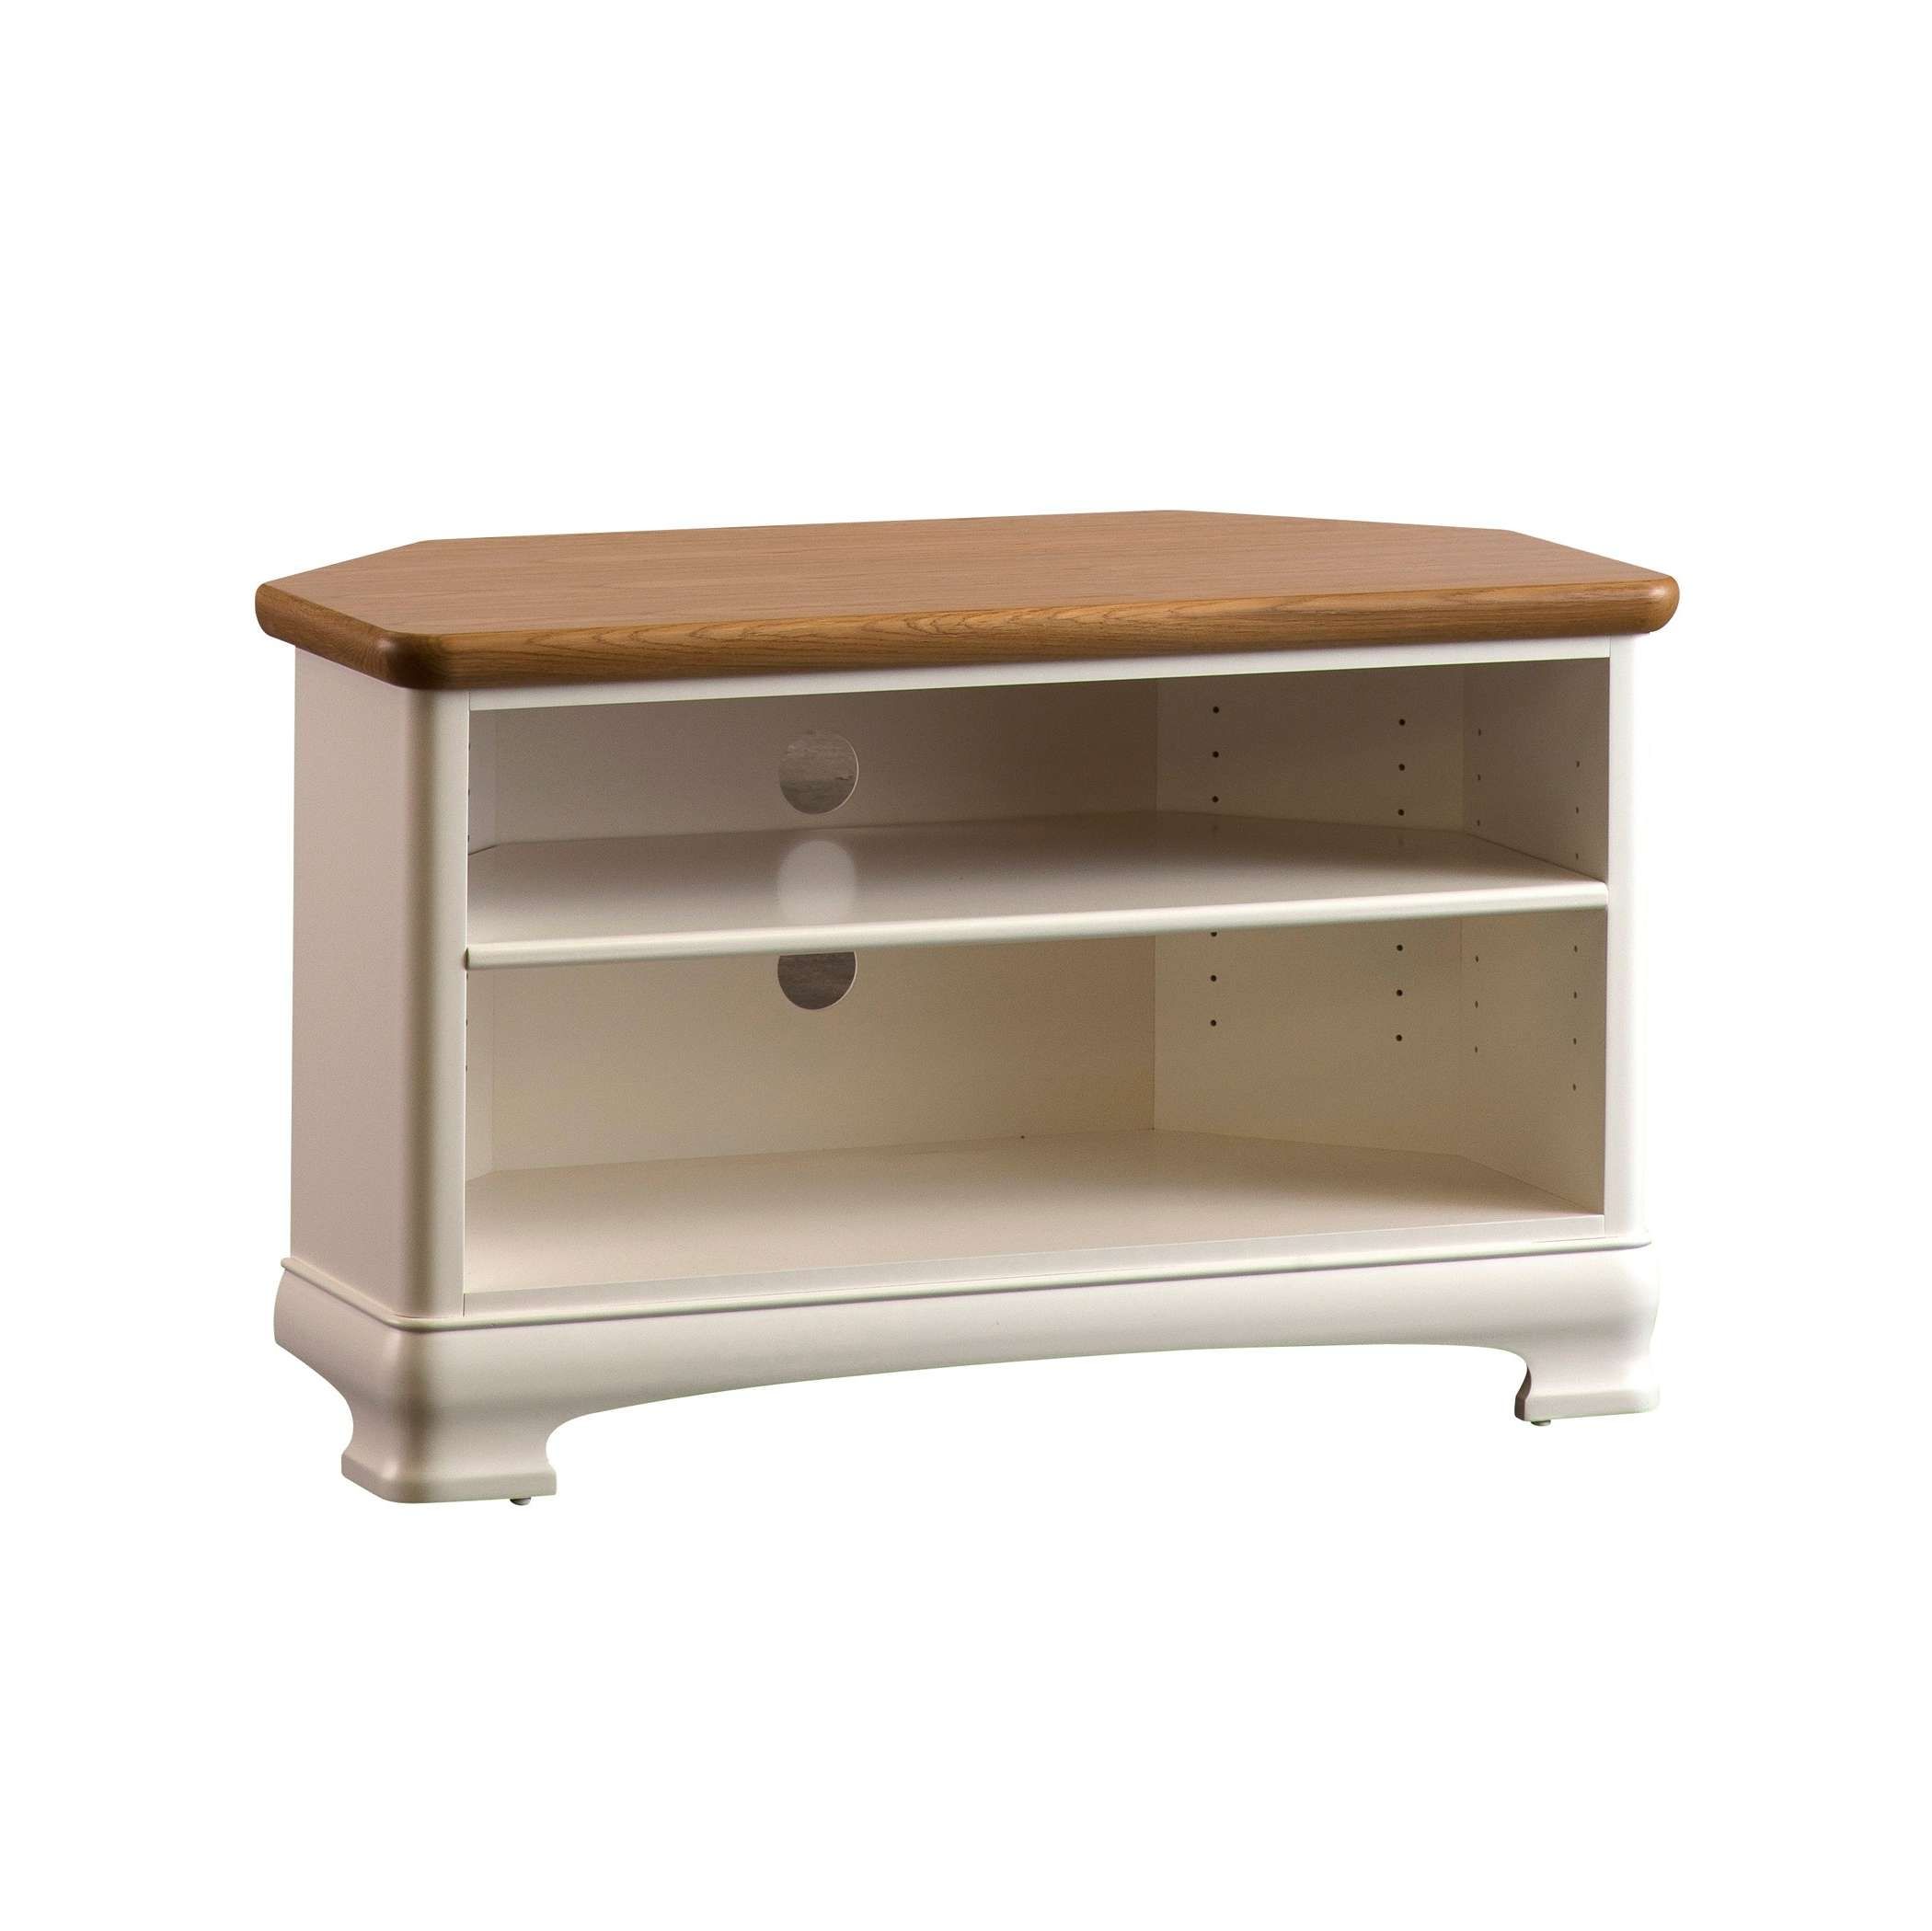 Painted Corner Tv Stand | Gola Furniture Uk With Regard To Painted Corner Tv Cabinets (View 1 of 20)